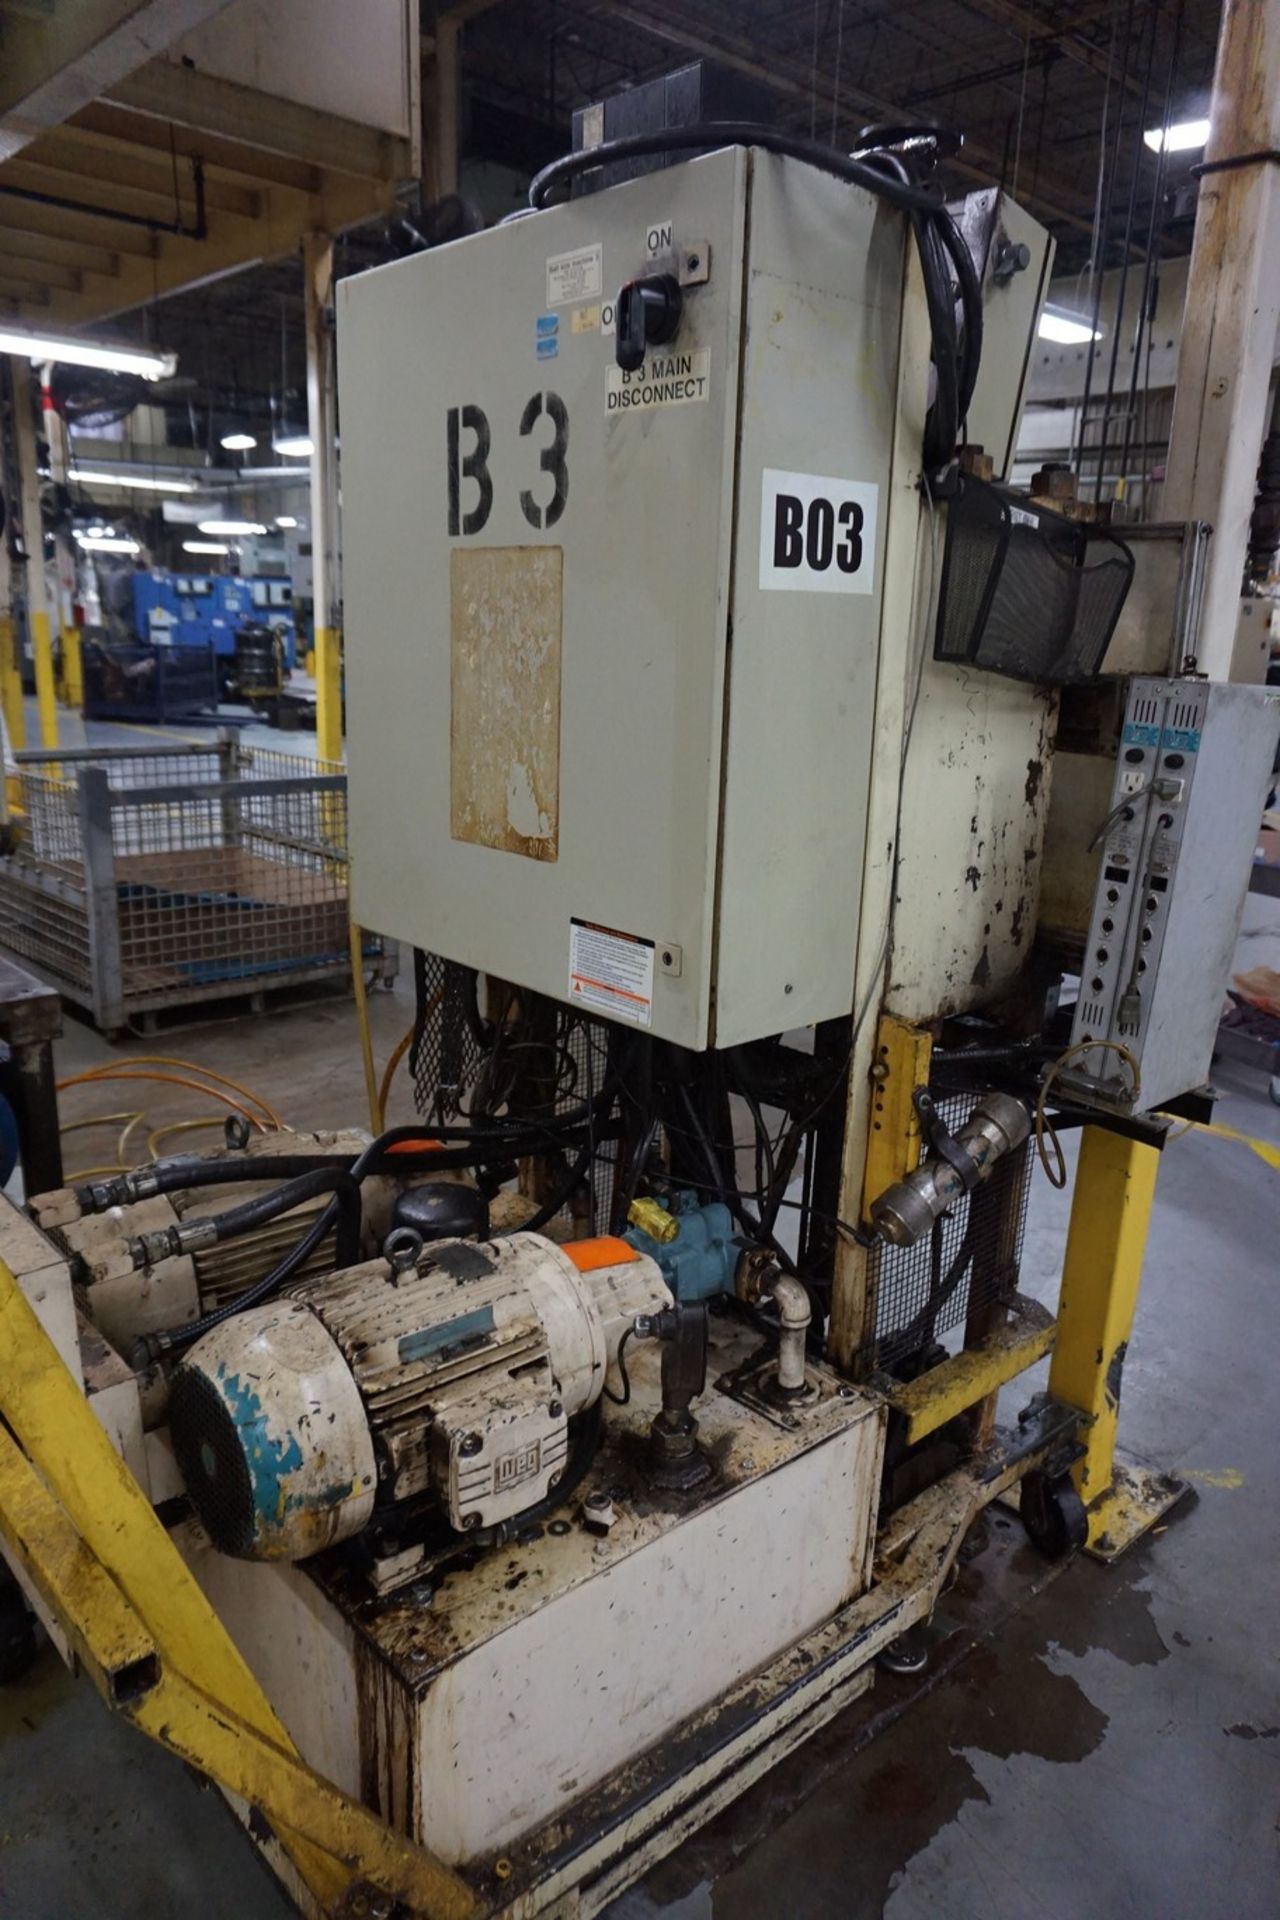 Hydraulic Ball Size Press with Controls, Lance L9100 Column Gauge (B3) - Image 3 of 3